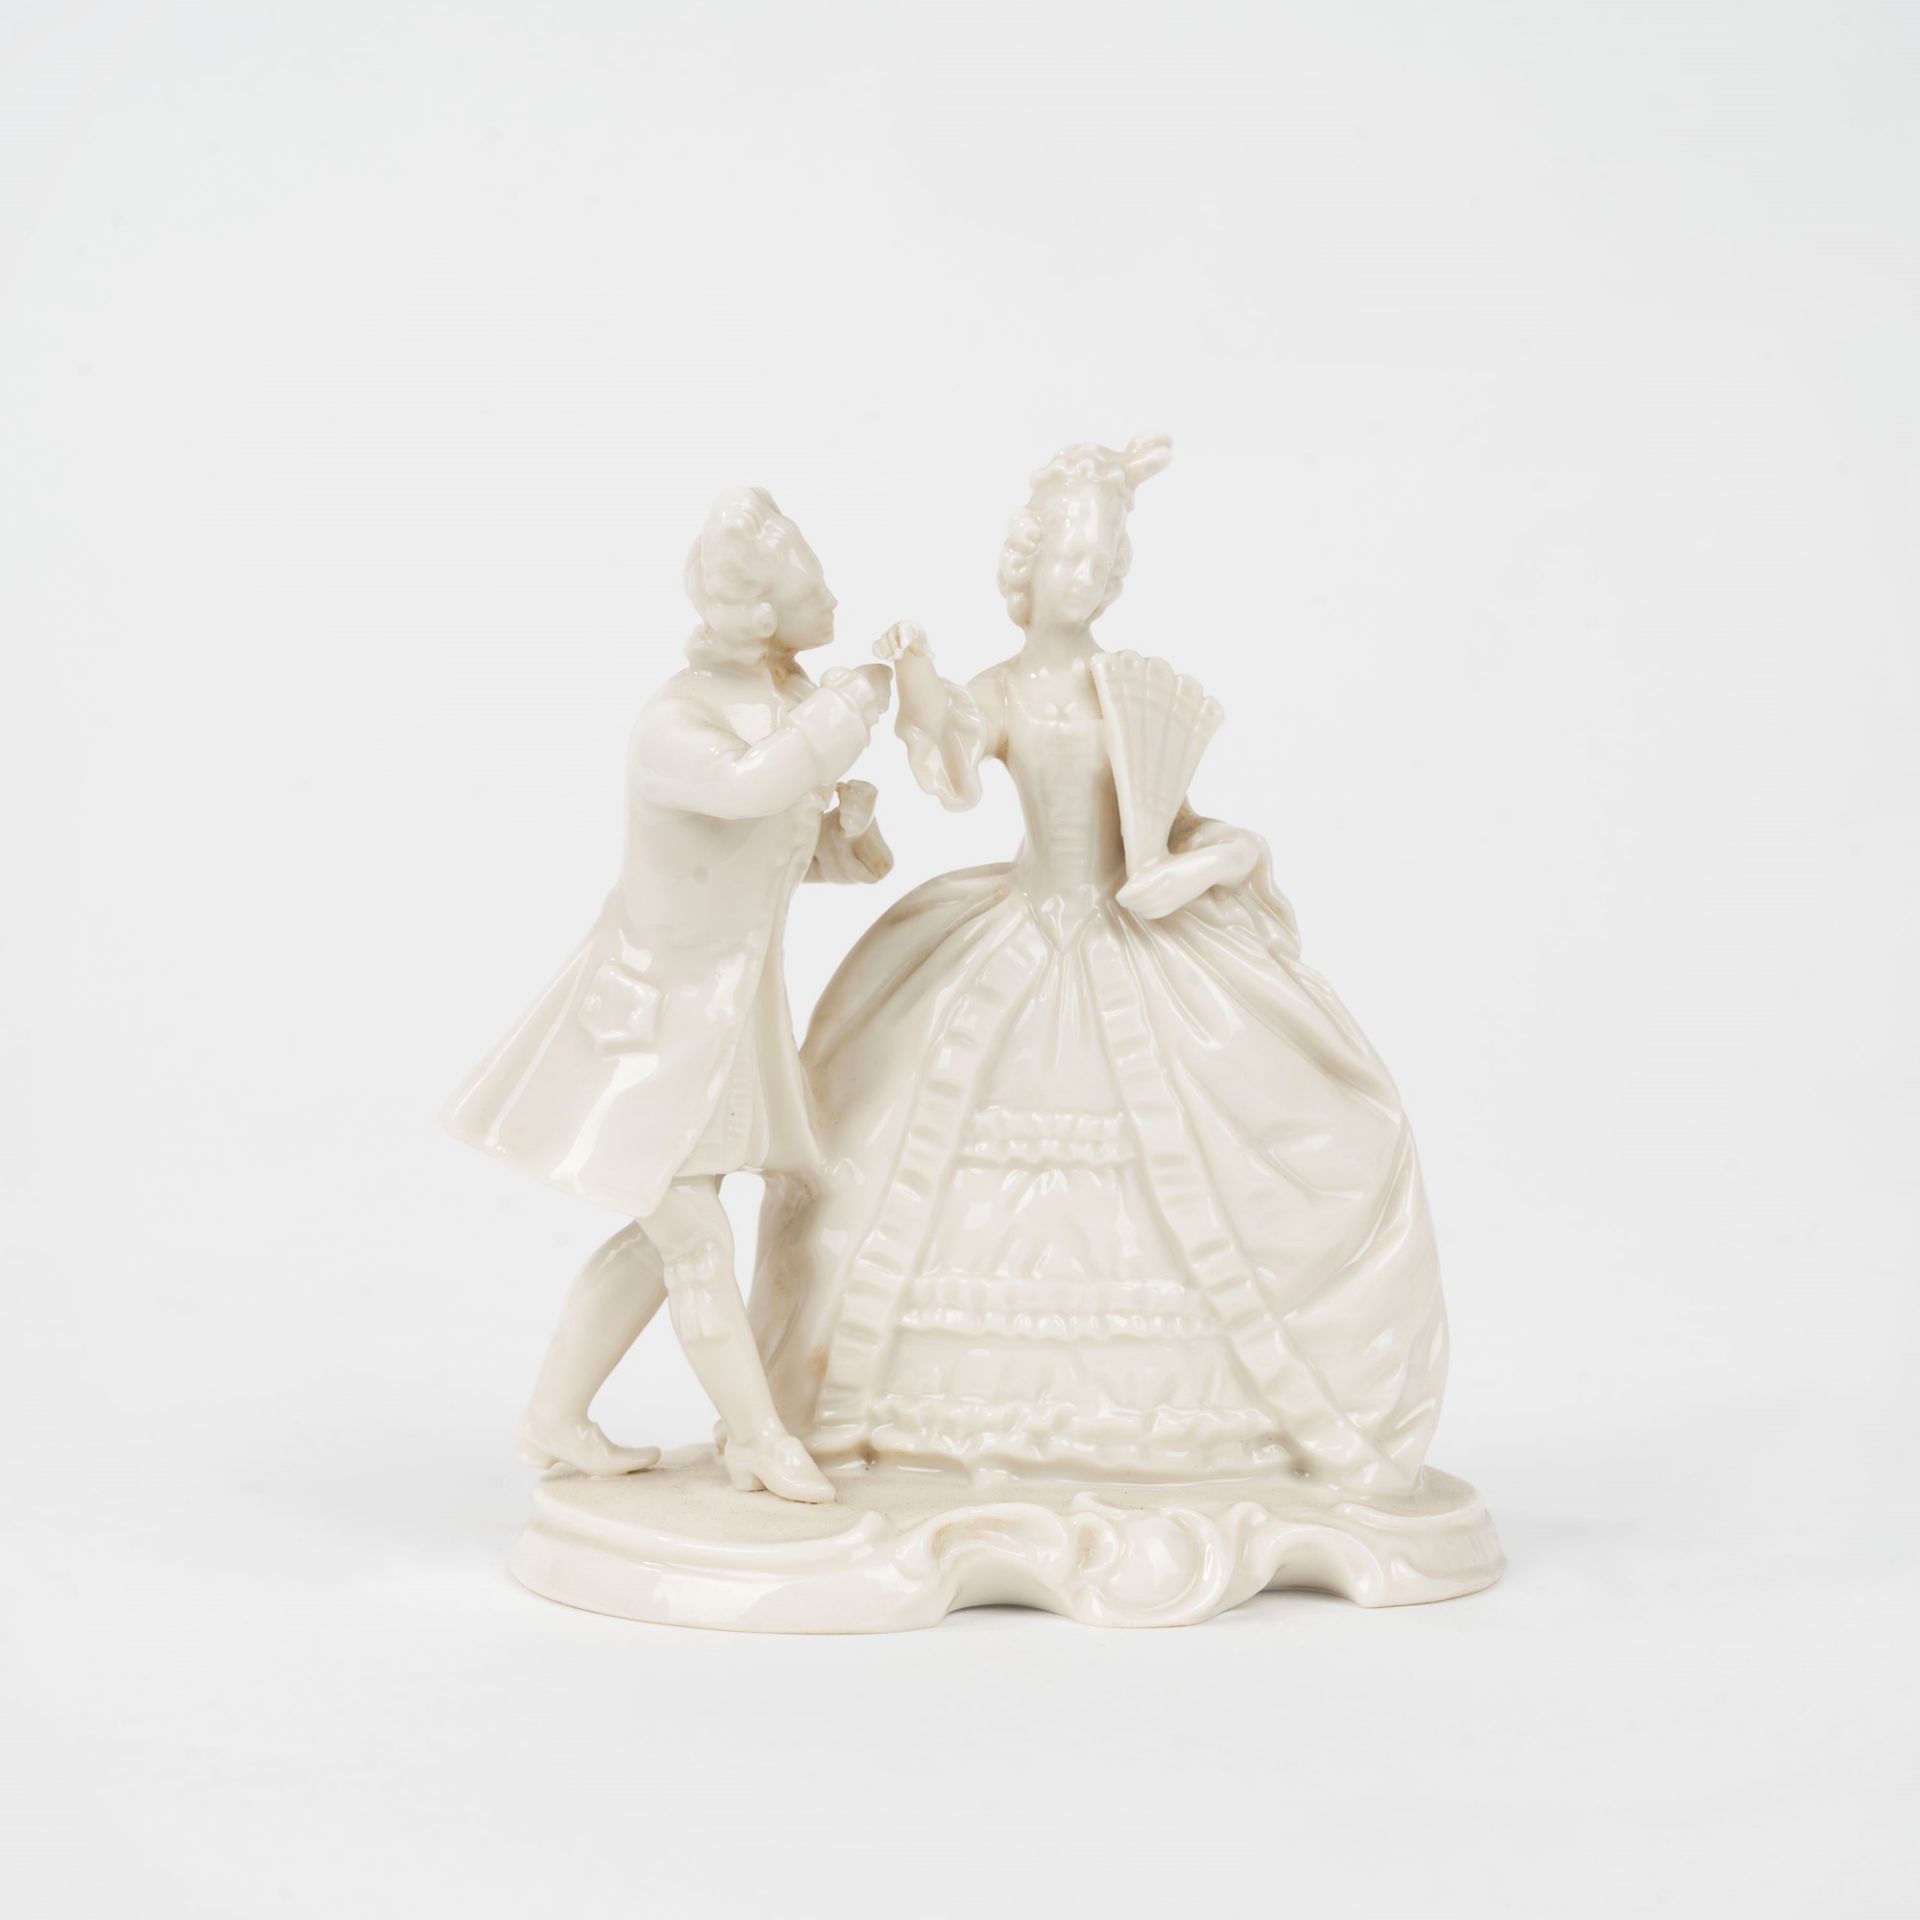 Lot consisting of seven white porcelain sculptures, 20th century - Image 8 of 10